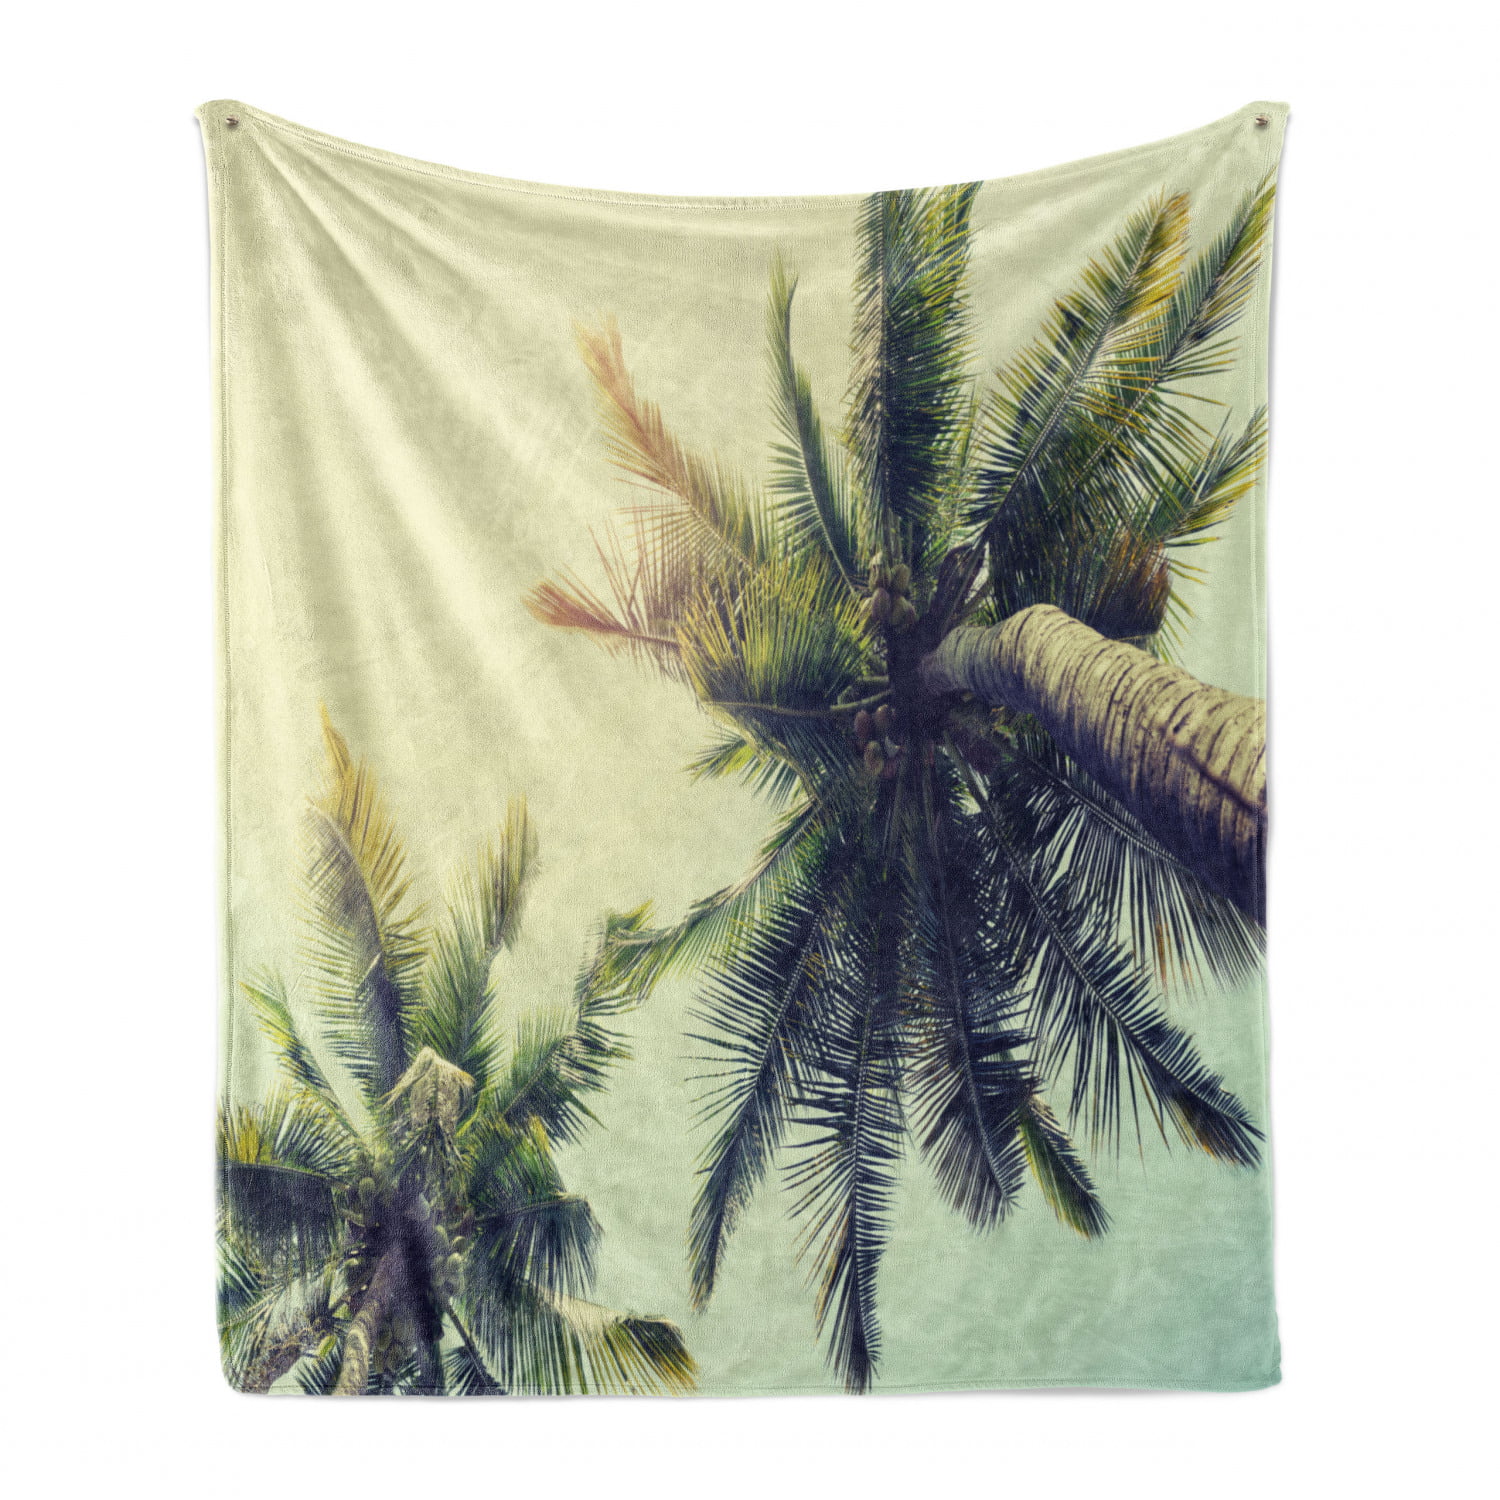 Ambesonne Tropical Soft Flannel Fleece Throw Blanket Cozy Plush for Indoor and Outdoor Use Aqua Green Exotic Beach with Coconut Palm Trees and Rocks Journey Oceanic Coastal Design 60 x 80